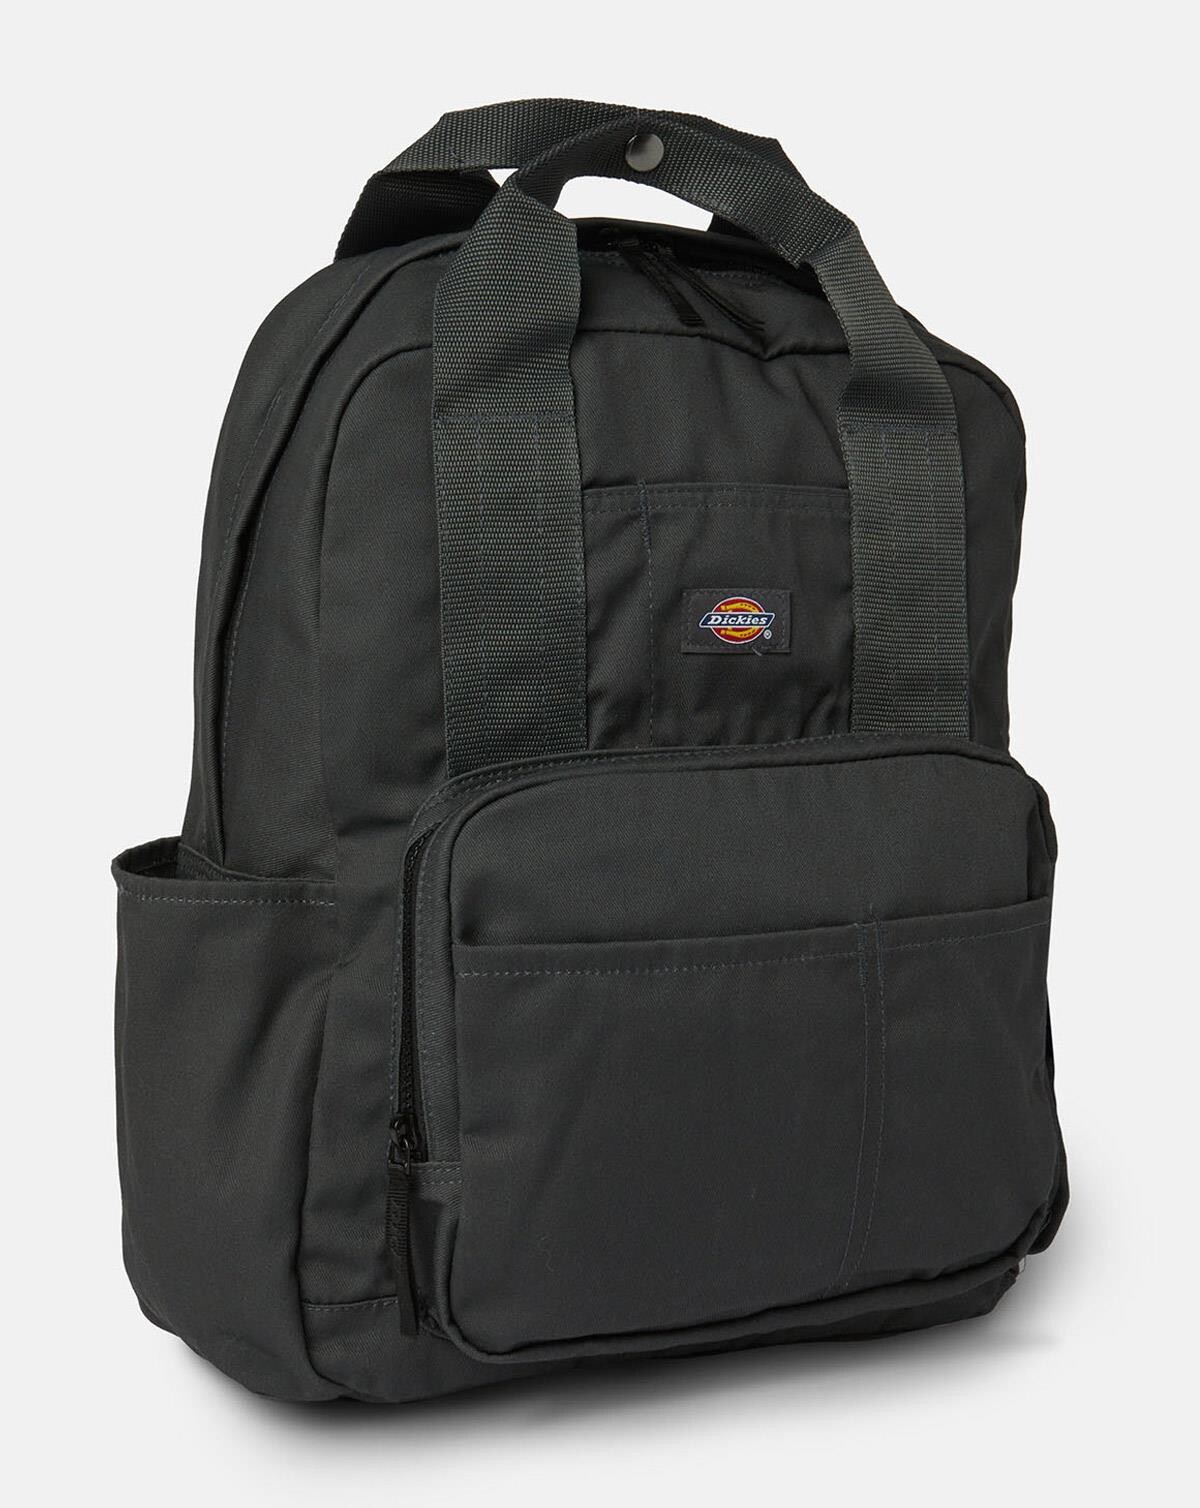 Dickies Lisbon Backpack (Charcoal, One Size)